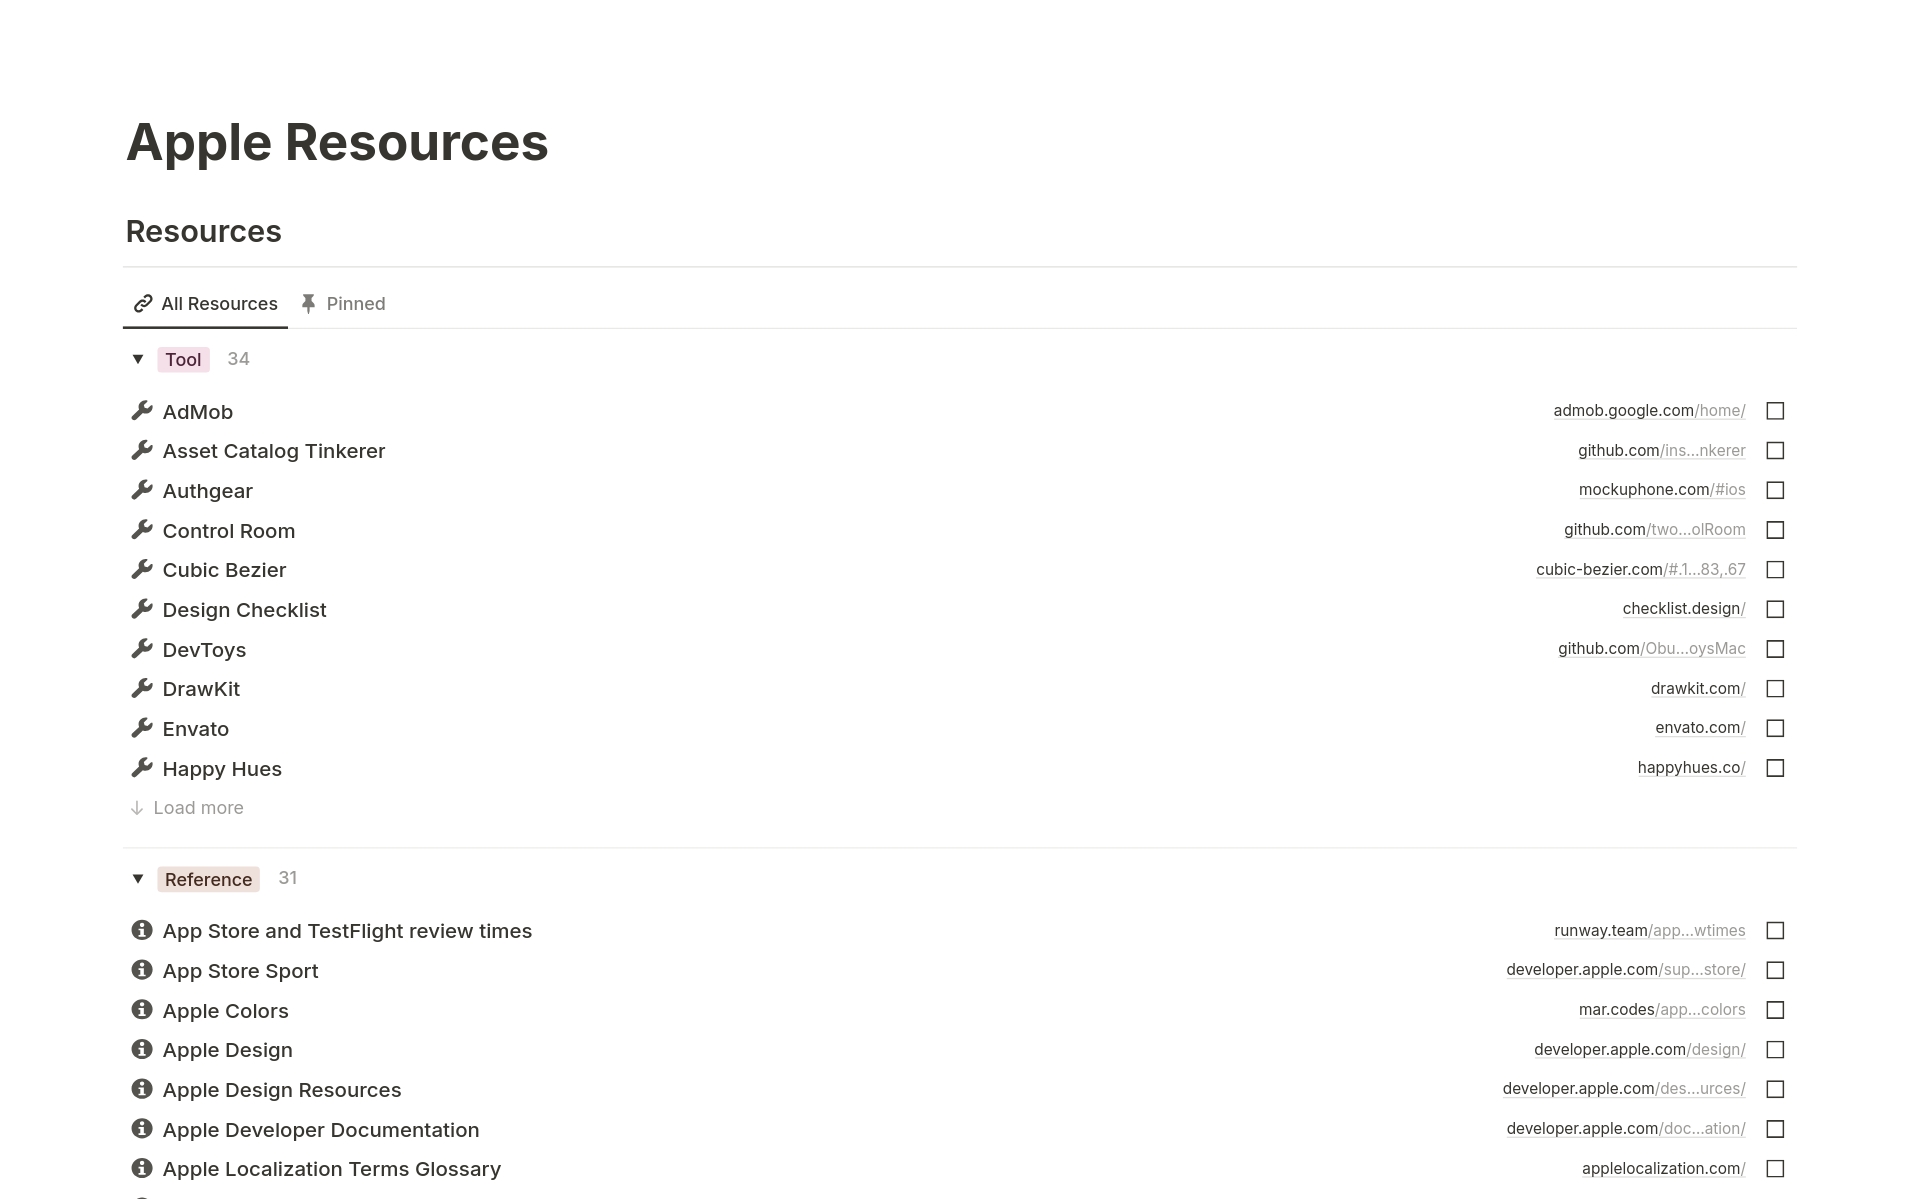 The 150+ iOS Resources includes a curated collection of tools, articles and other resources.